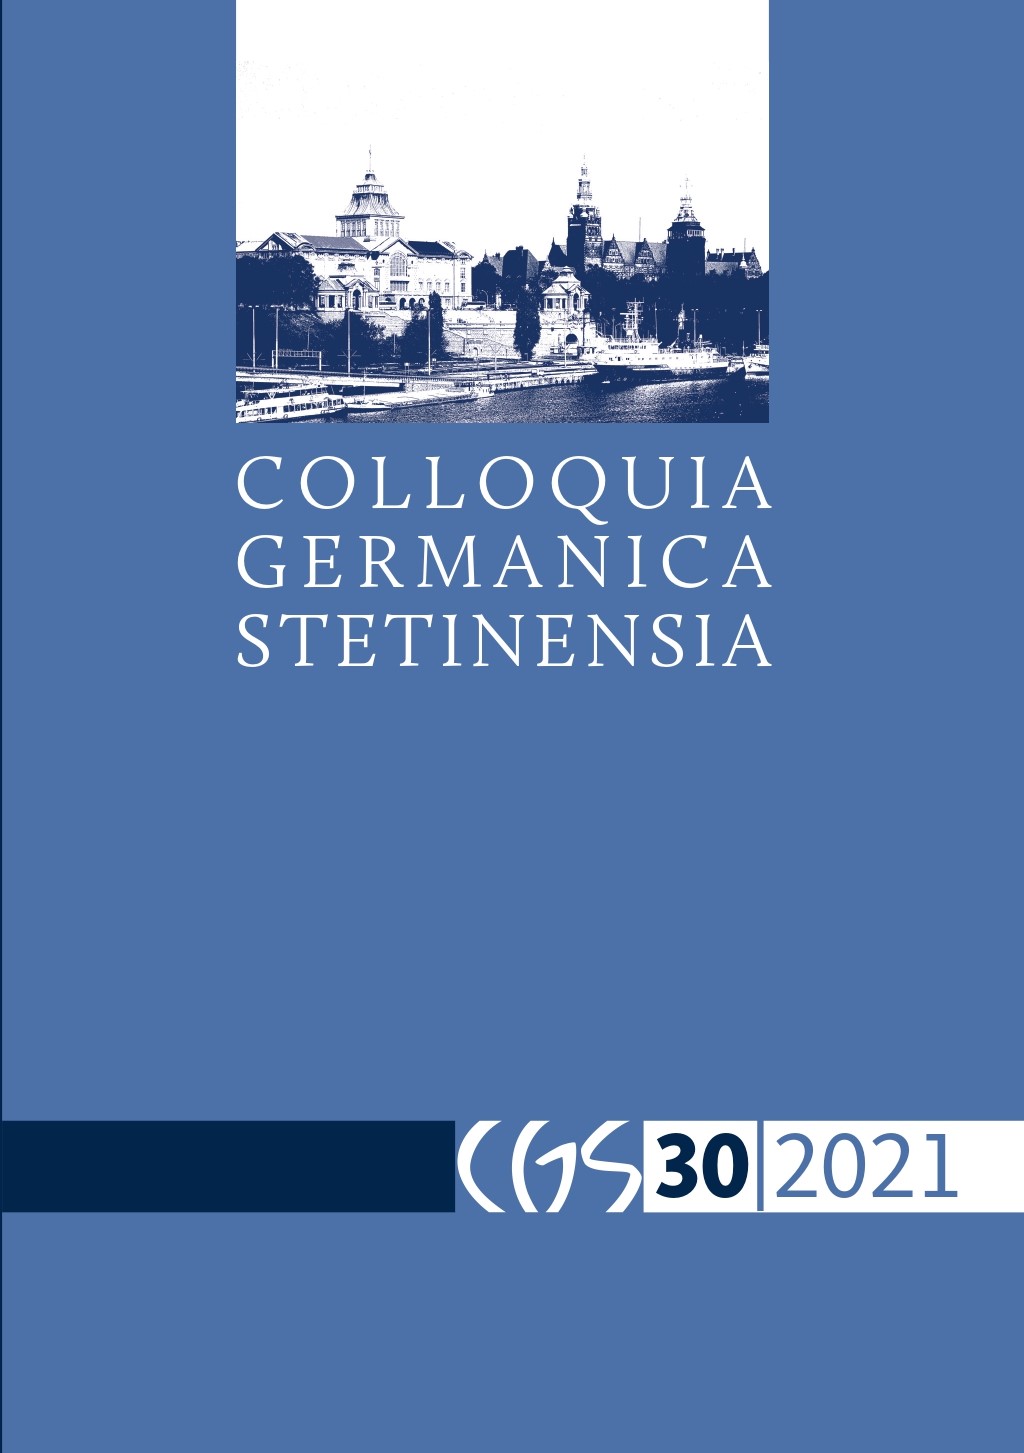 On the influence of the foreign language morphemes on the german language from the time of the sars-cov-2 pandemic Cover Image